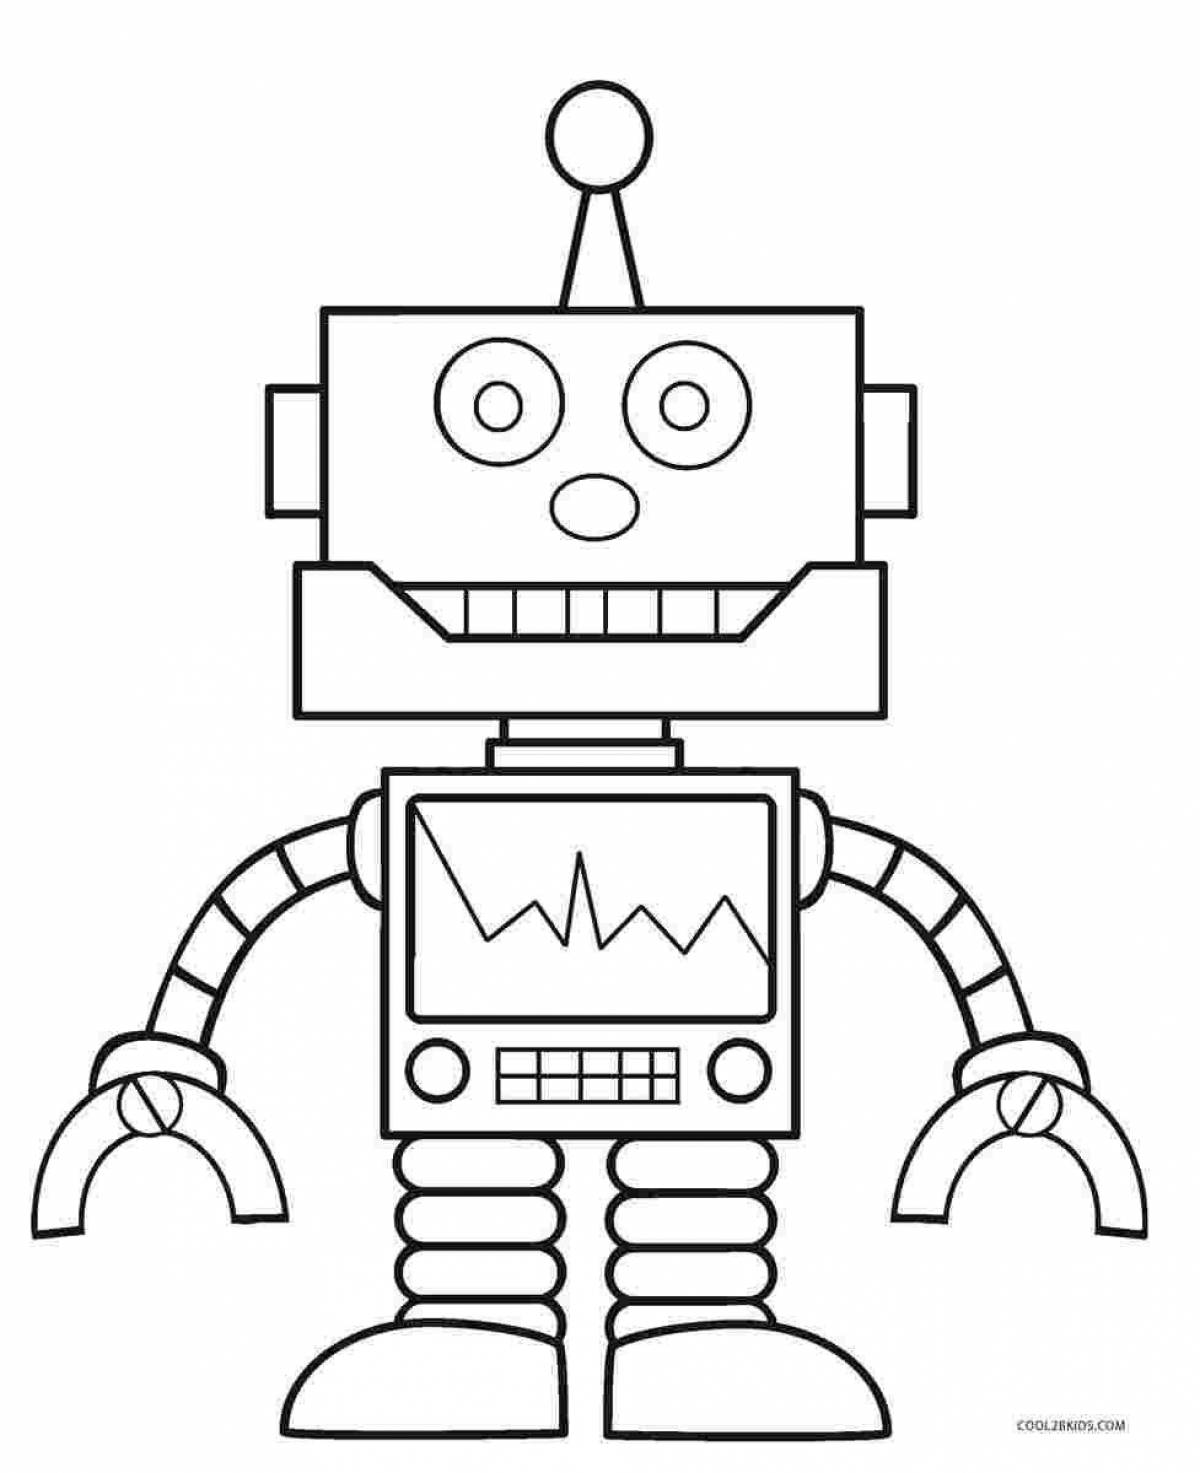 Fun robot coloring book for 5-6 year olds